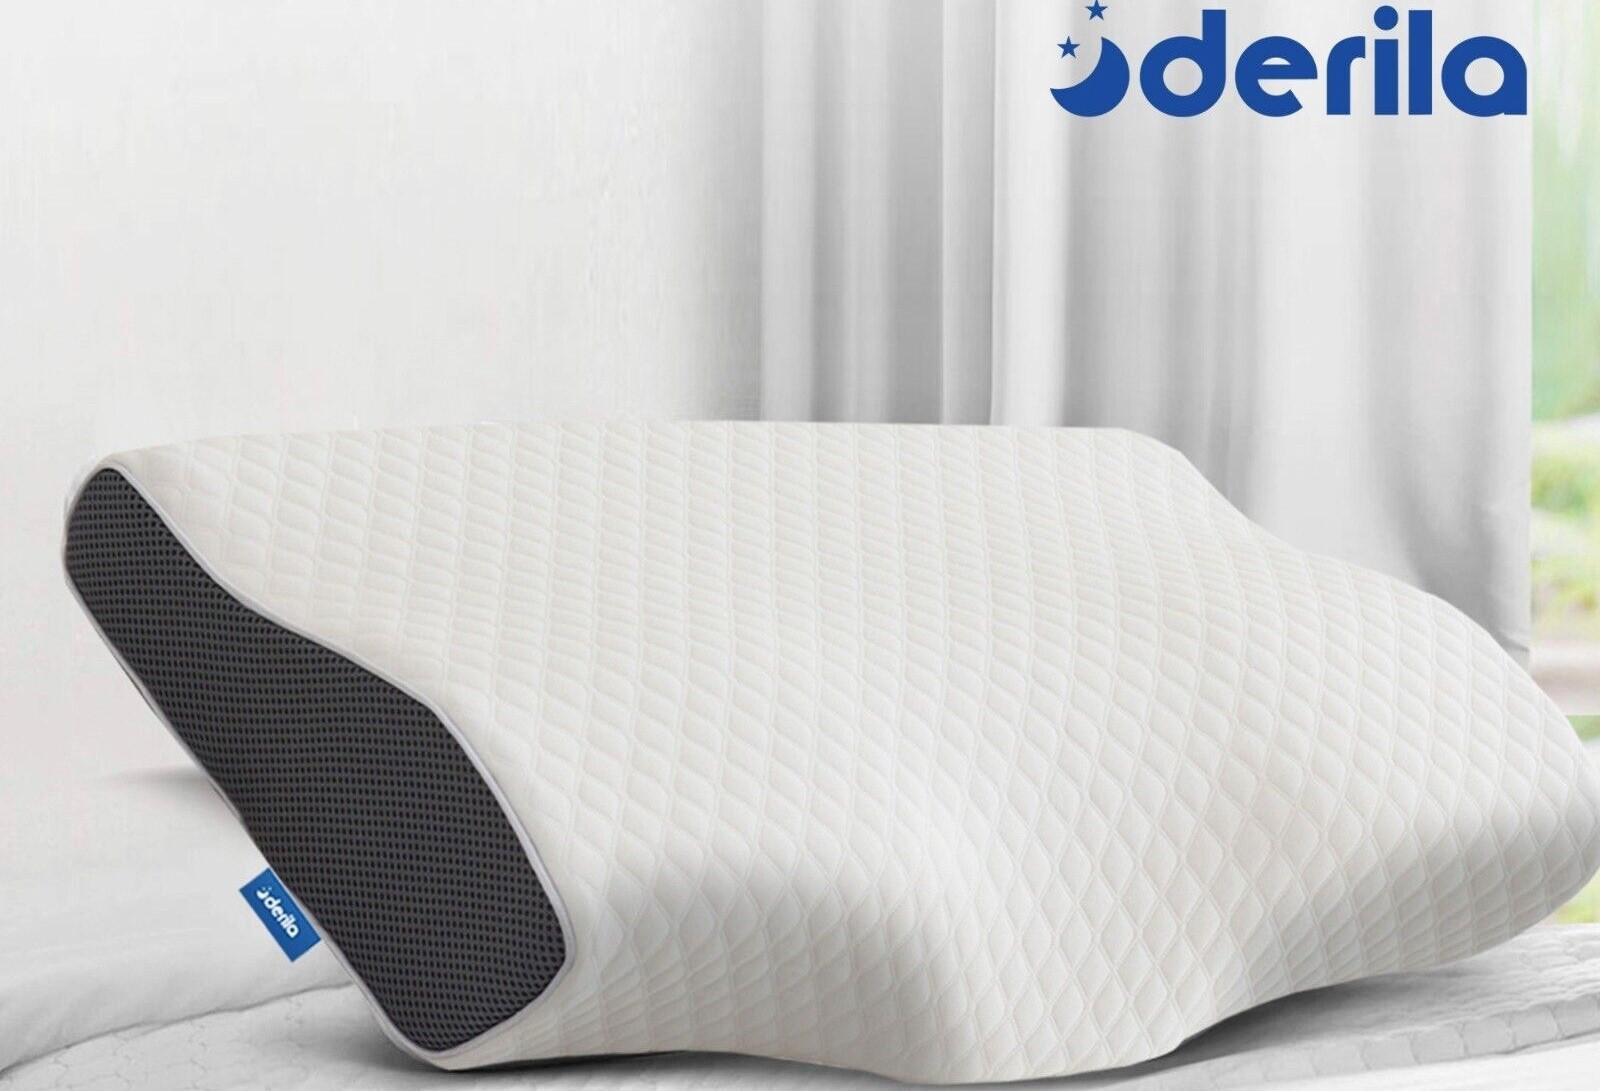 Shocking Truth: Derila Pillows Exposed With Negative Reviews